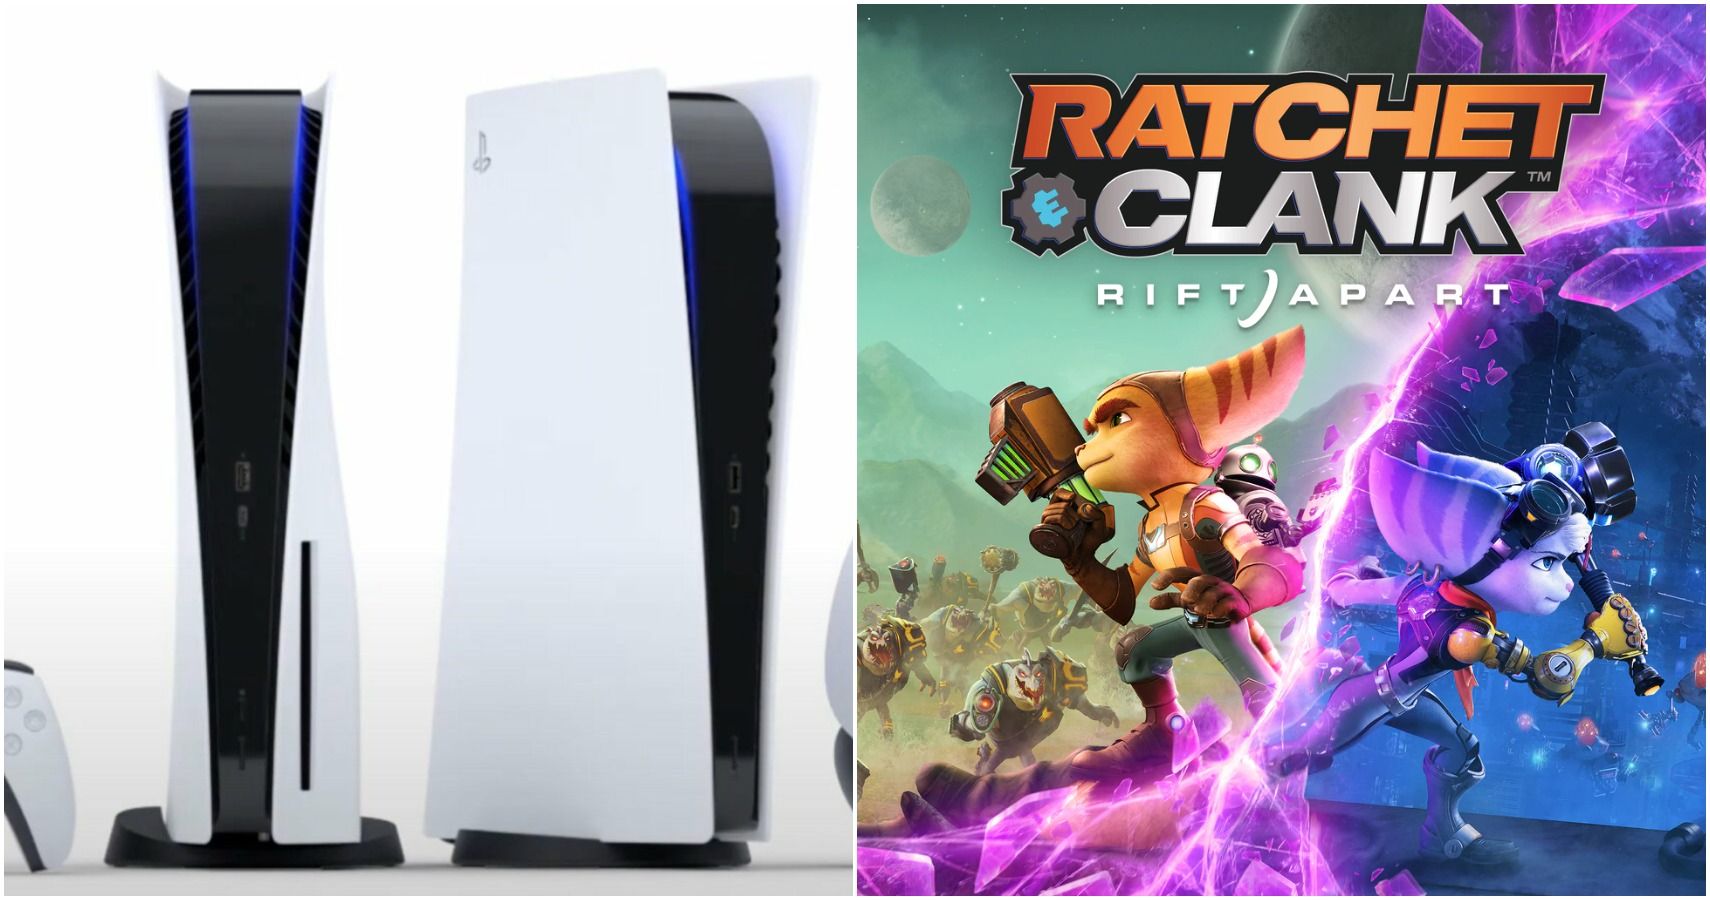 Ps5 ce 108255. Ratchet and Clank ps5. Ratchet Clank: Rift Apart ps5 Screen. Ratchet Clank ps5 купить. Ce-108255-1 ps5 ошибка Ratchet and Clank.